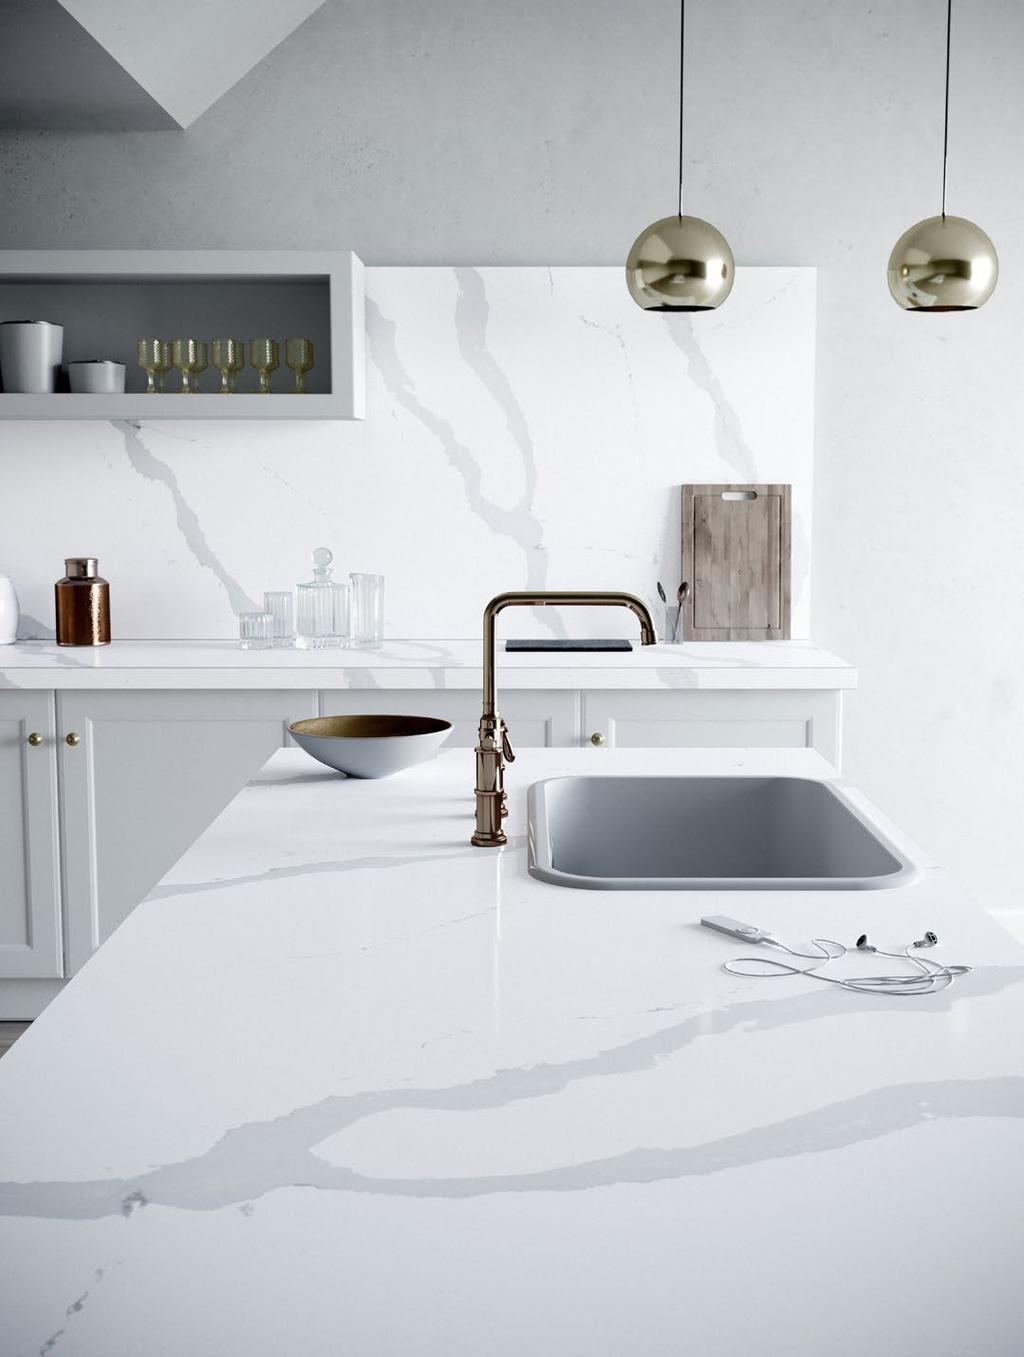 Resistance to Stains Silestone is a non-porous surface which is highly